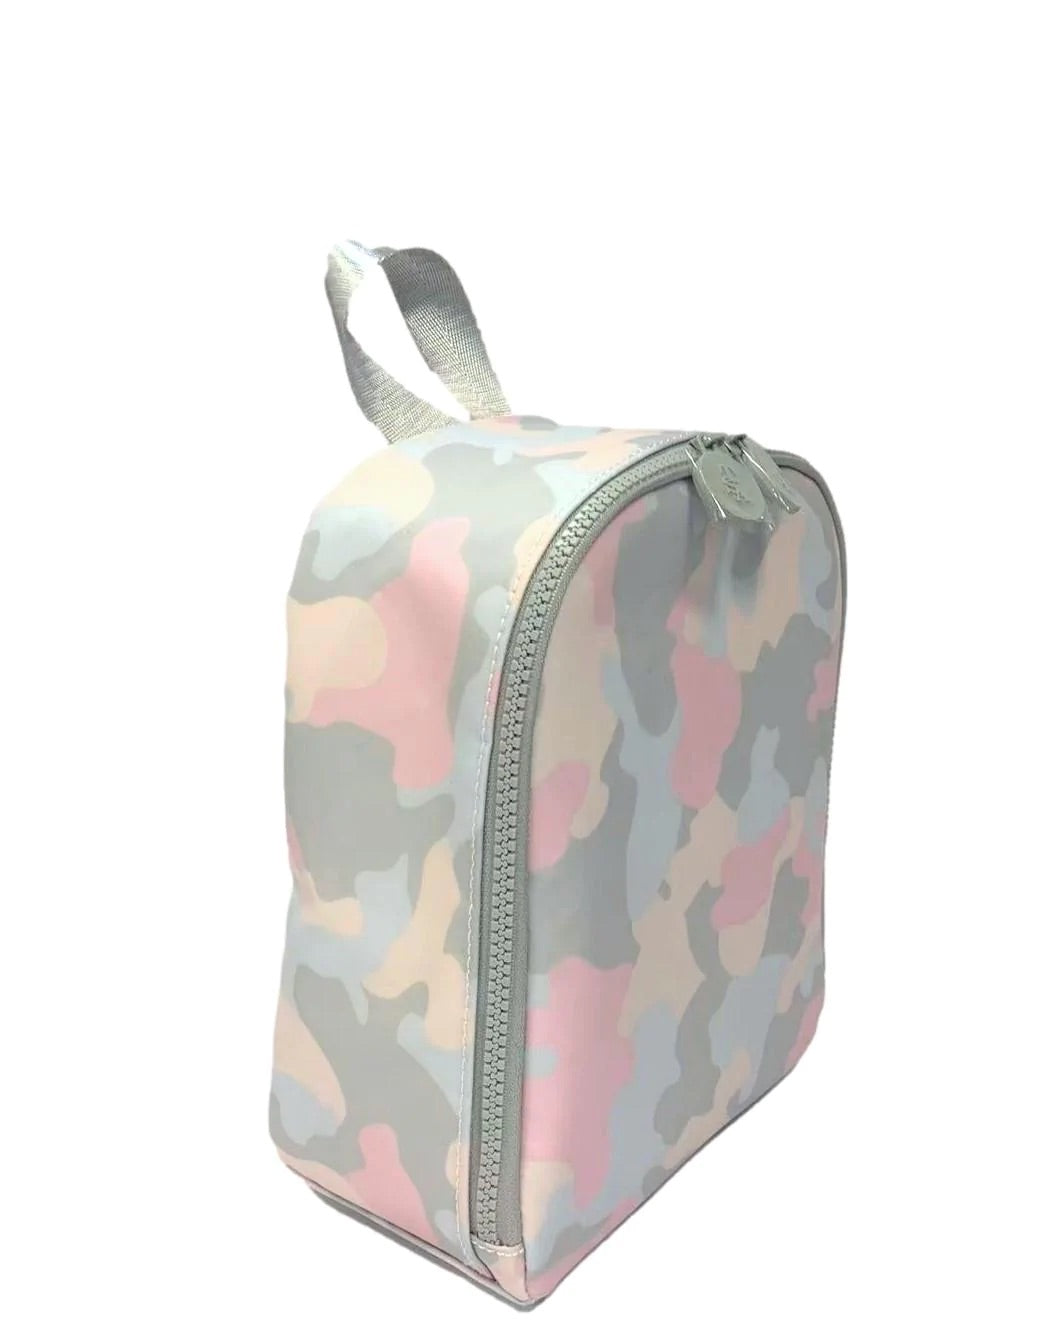 Personalized Nylon Pink Camo Lunch Sack - Give Wink